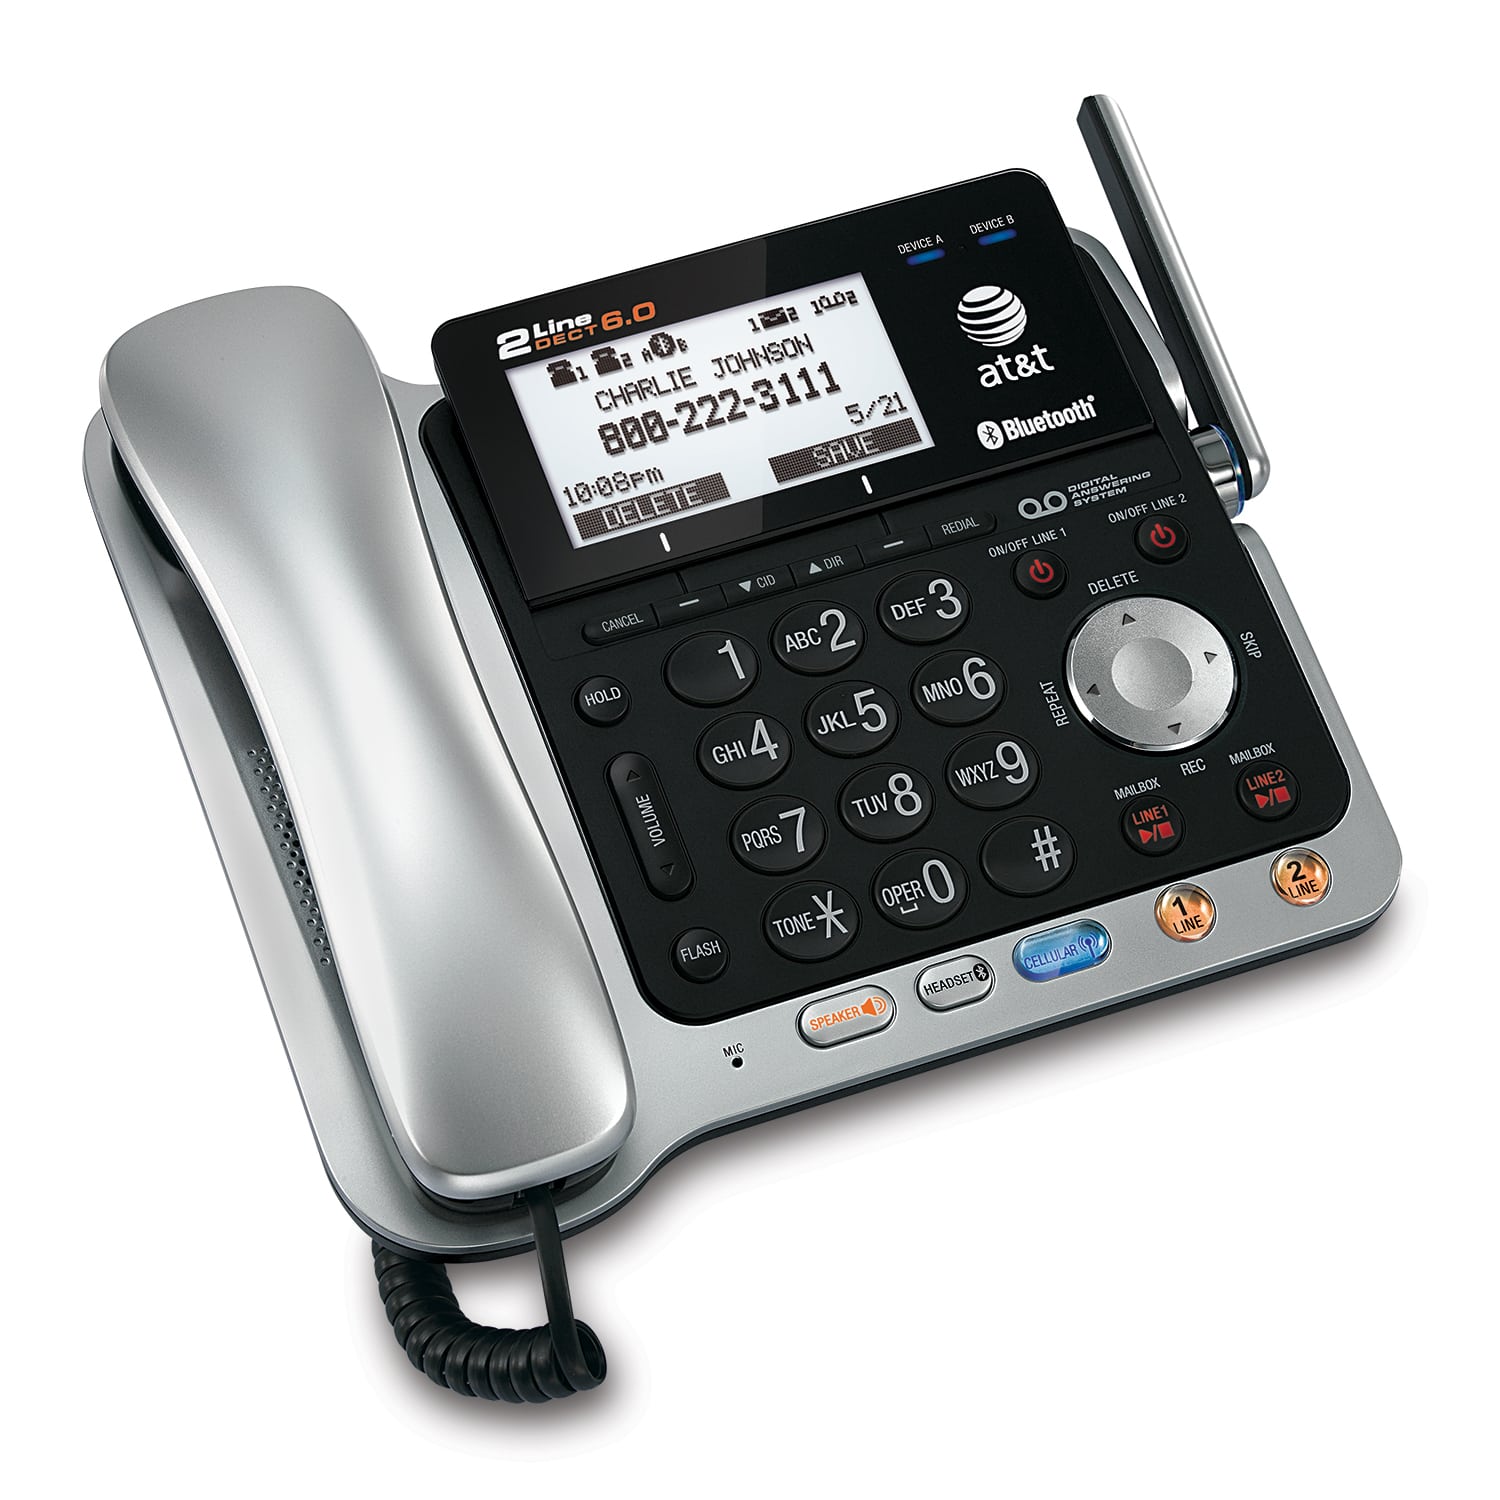 2-line 2 handset Connect to Cell™ corded/cordless answering system with caller ID/call waiting - view 3